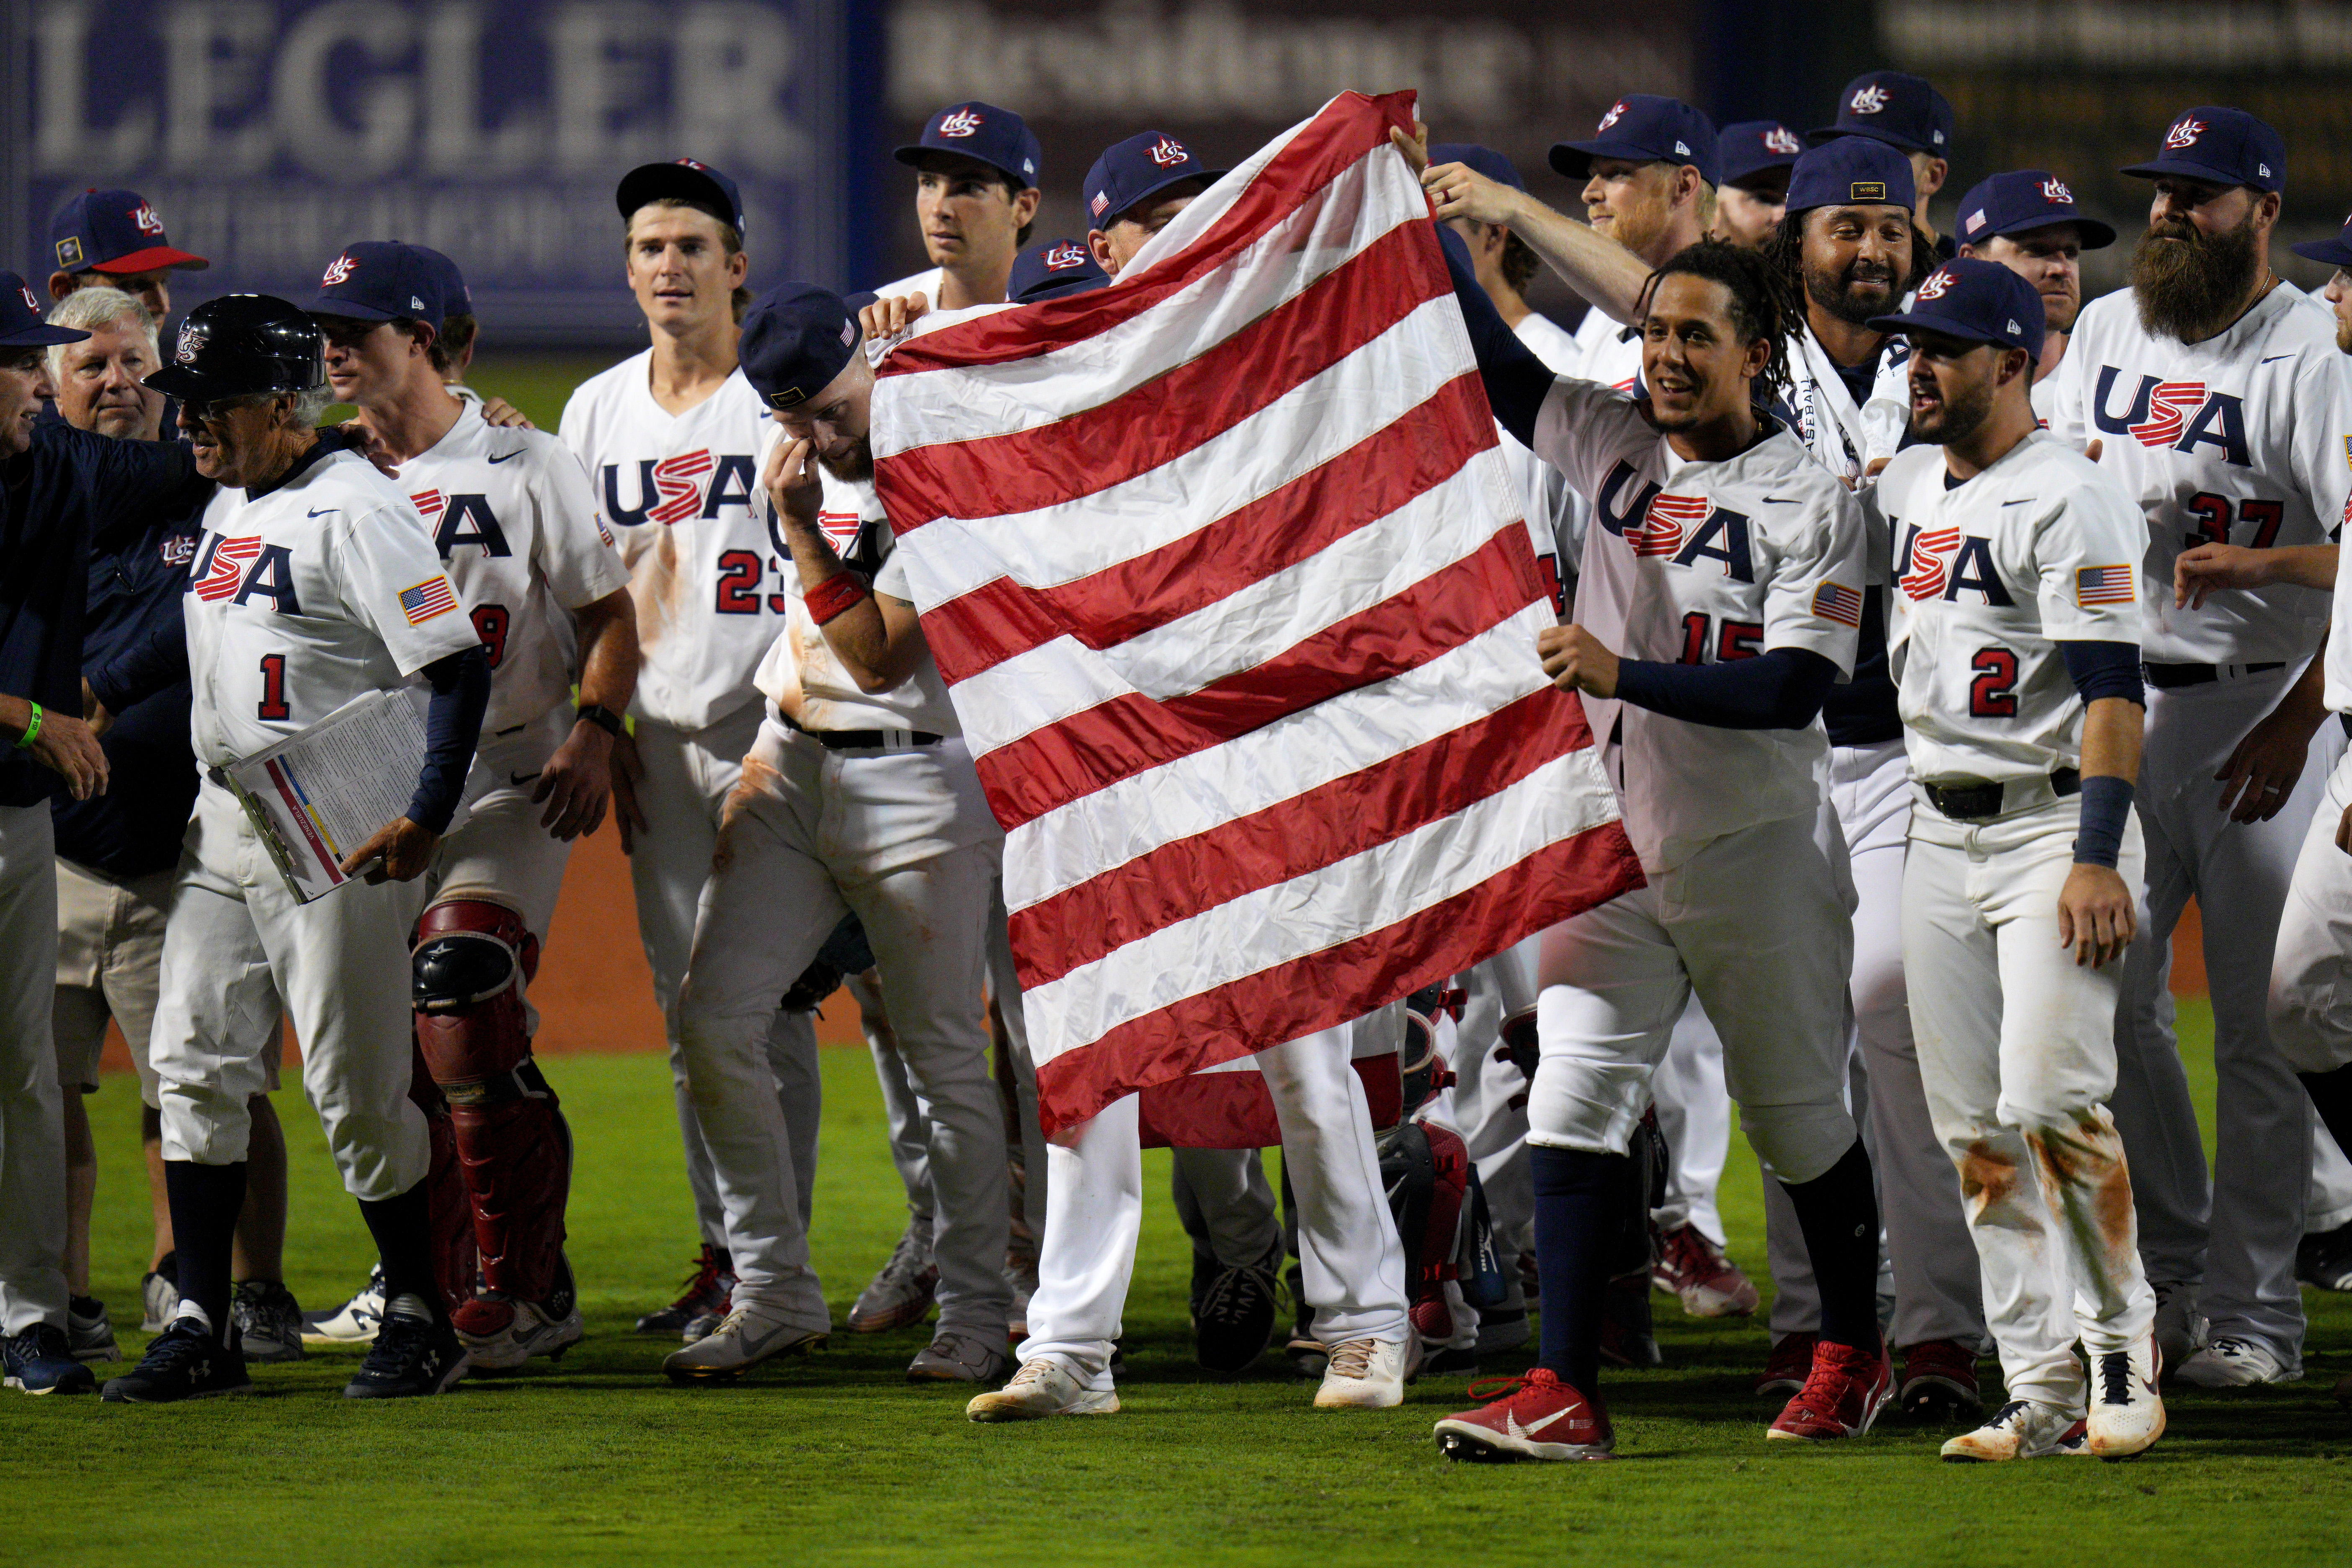 Baseball returns to the Olympics: Team USA ready for Tokyo 2020 qualifier